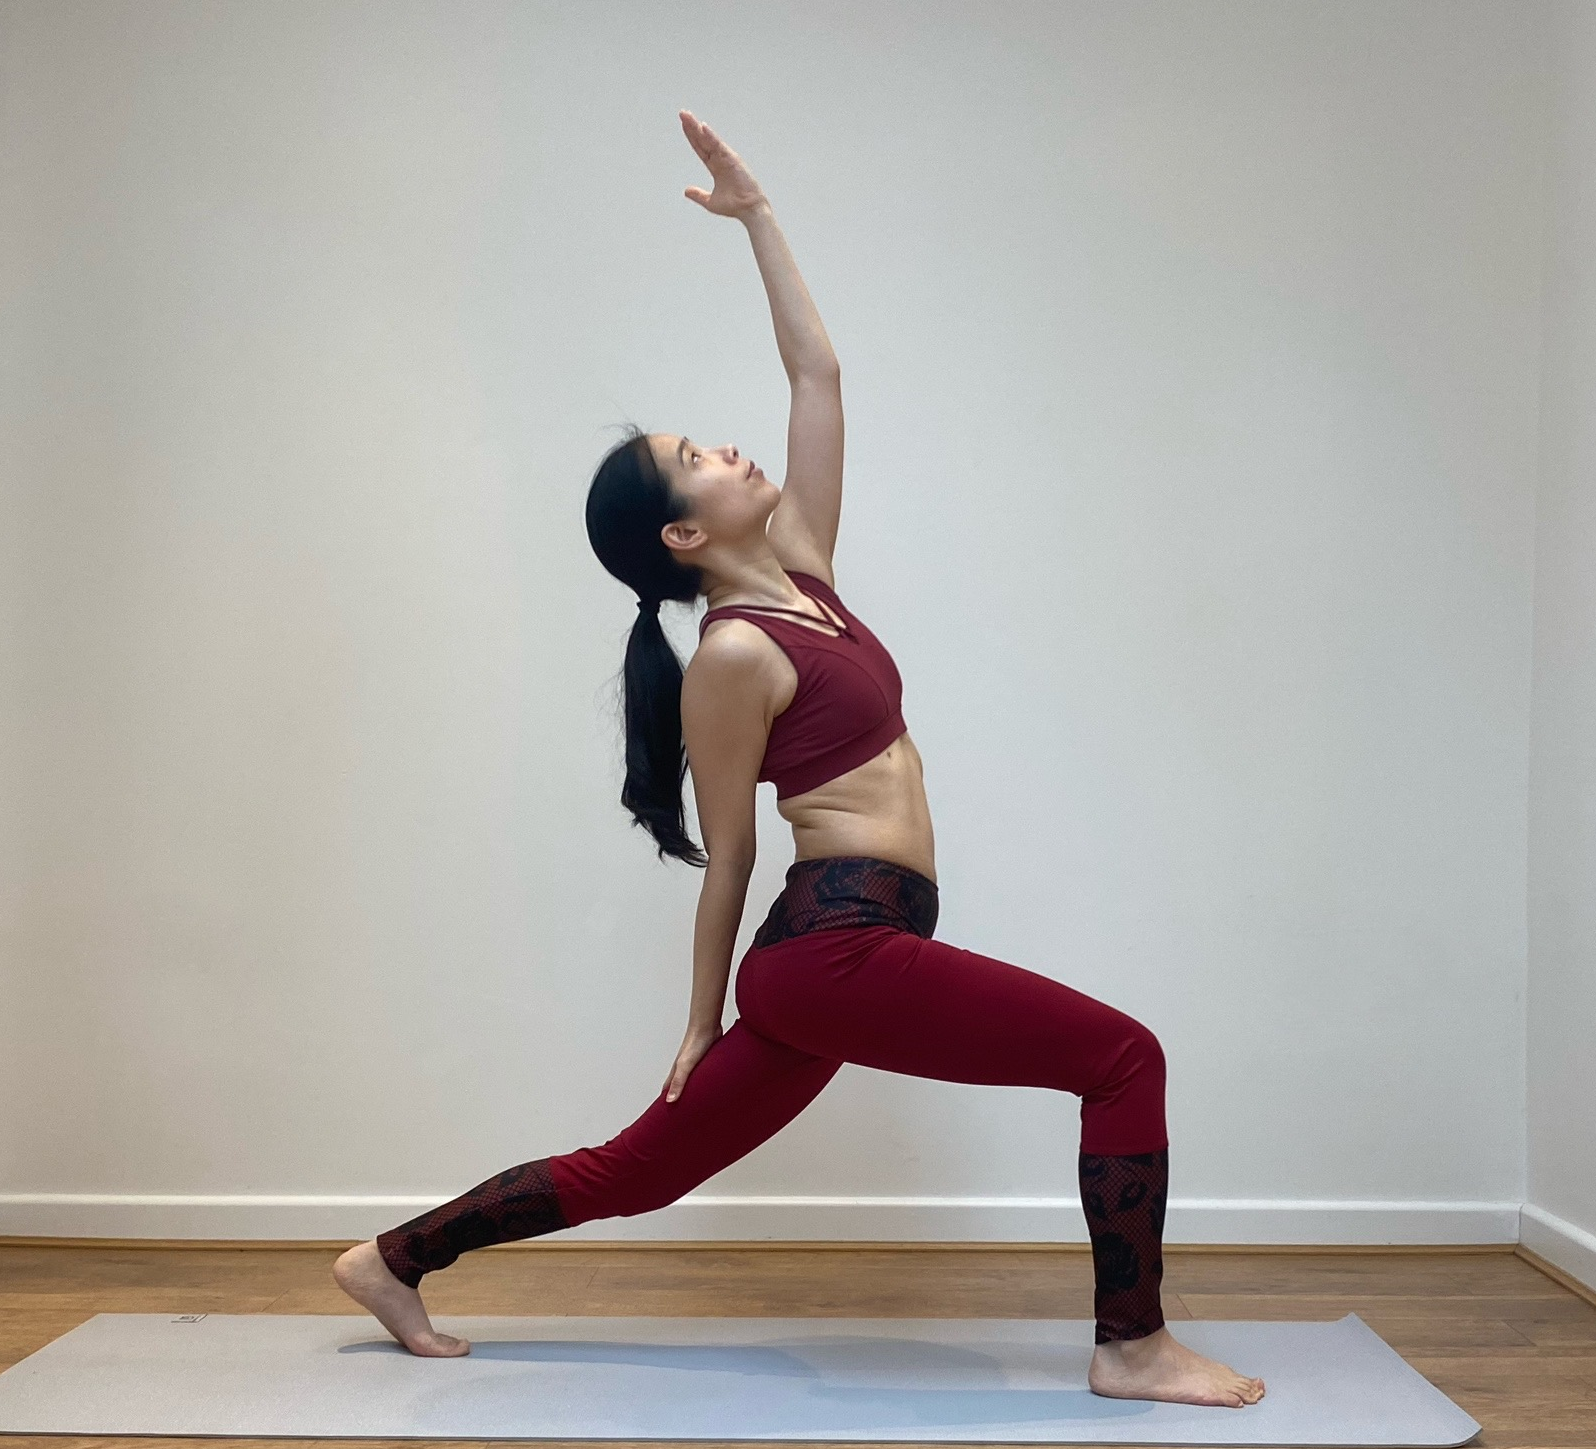 Yoga Mind Balance offers yoga classes, 1-1 Private sessions and Workshops in South Woodford.